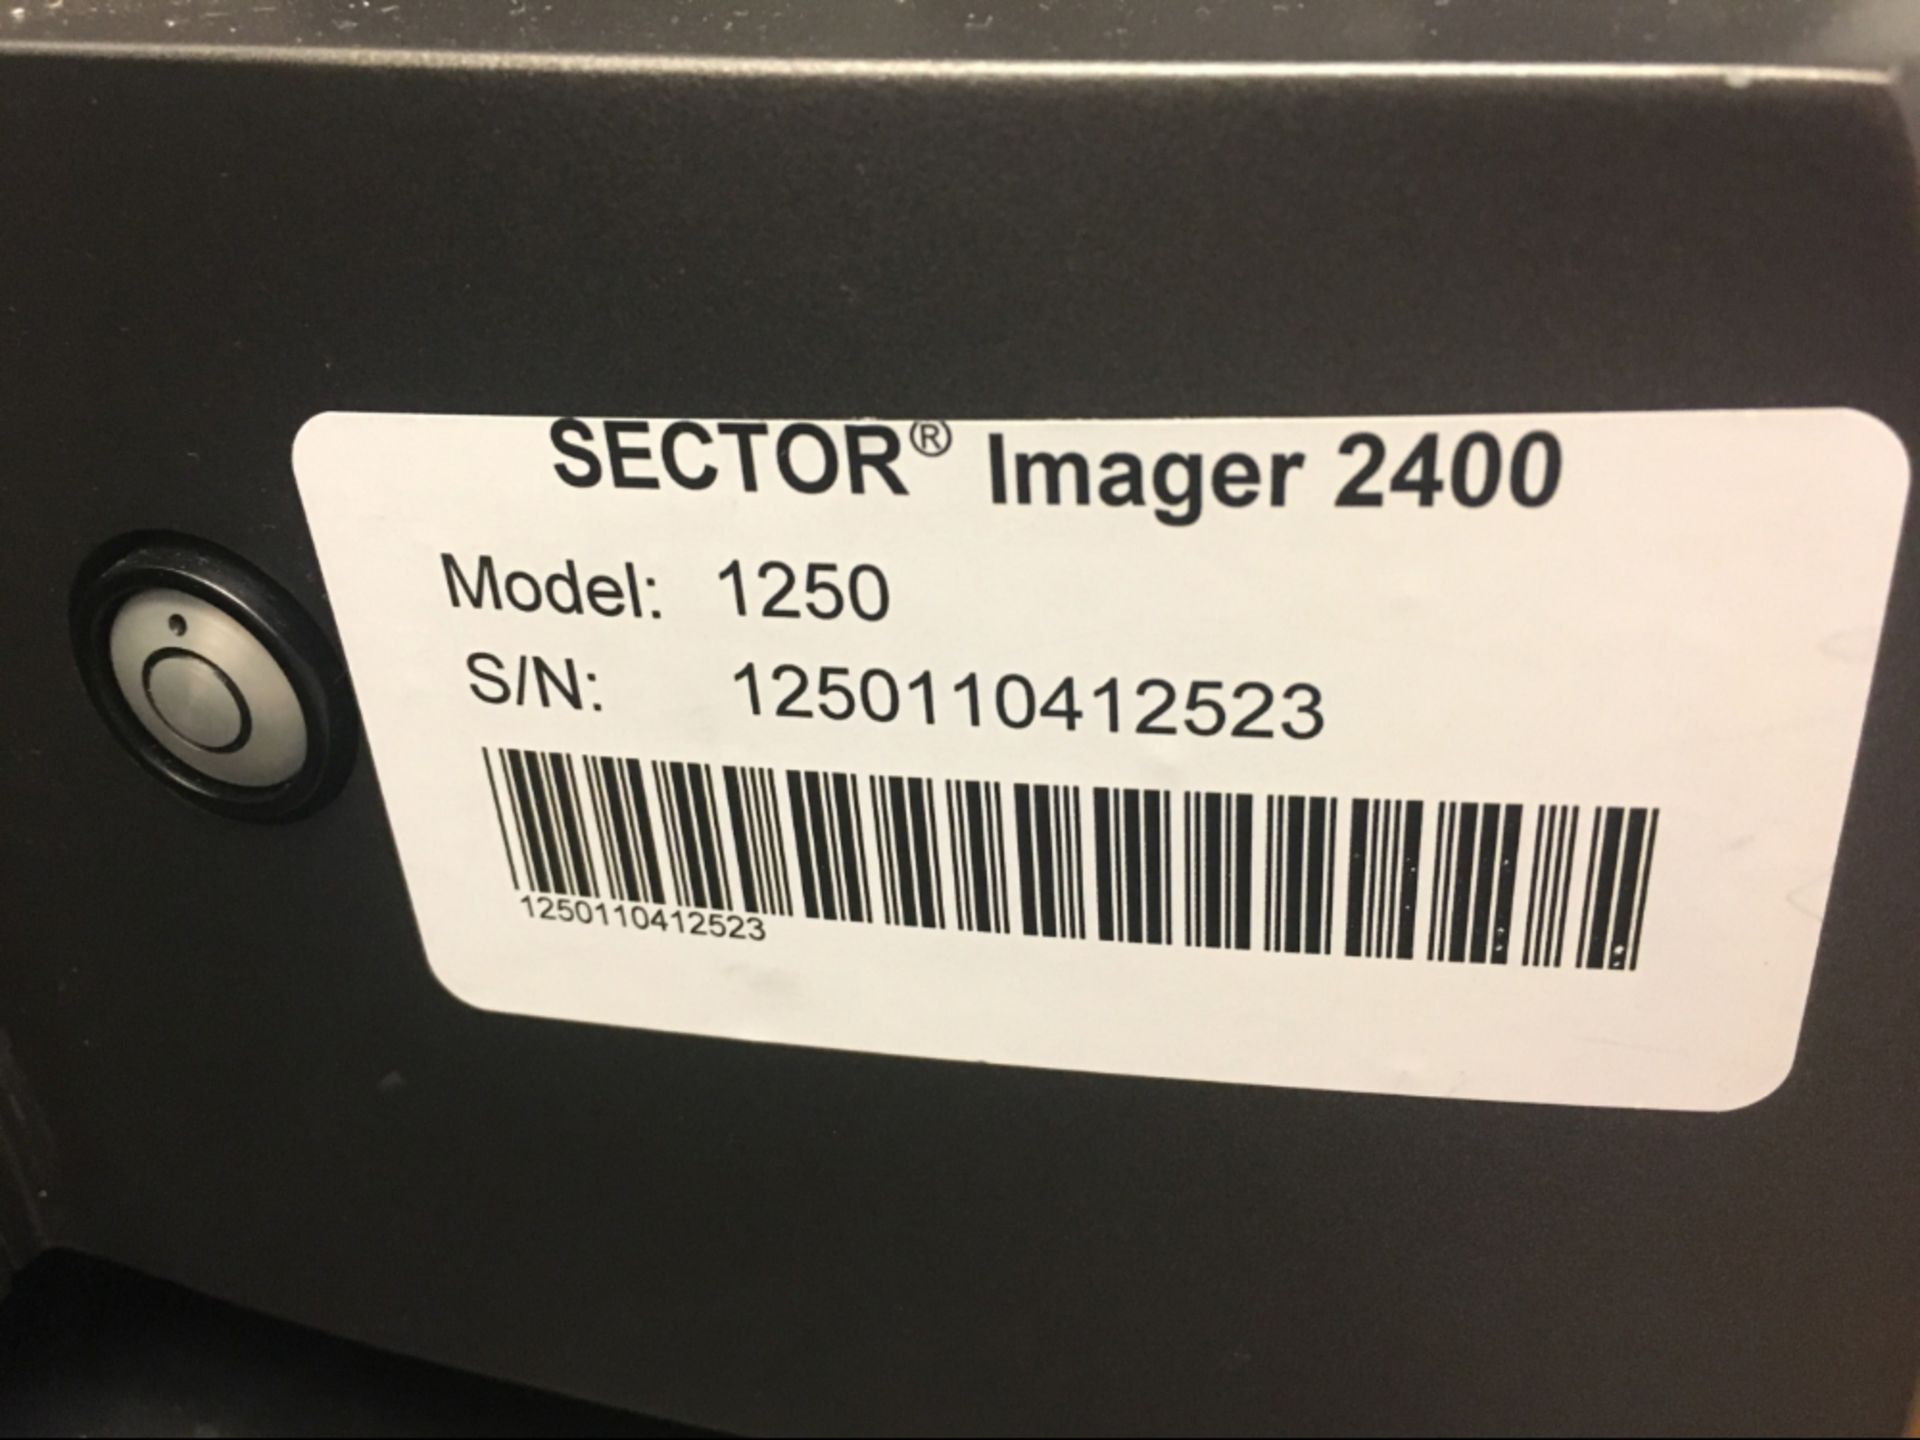 MSD SECTOR Imager 2400 - Image 2 of 2